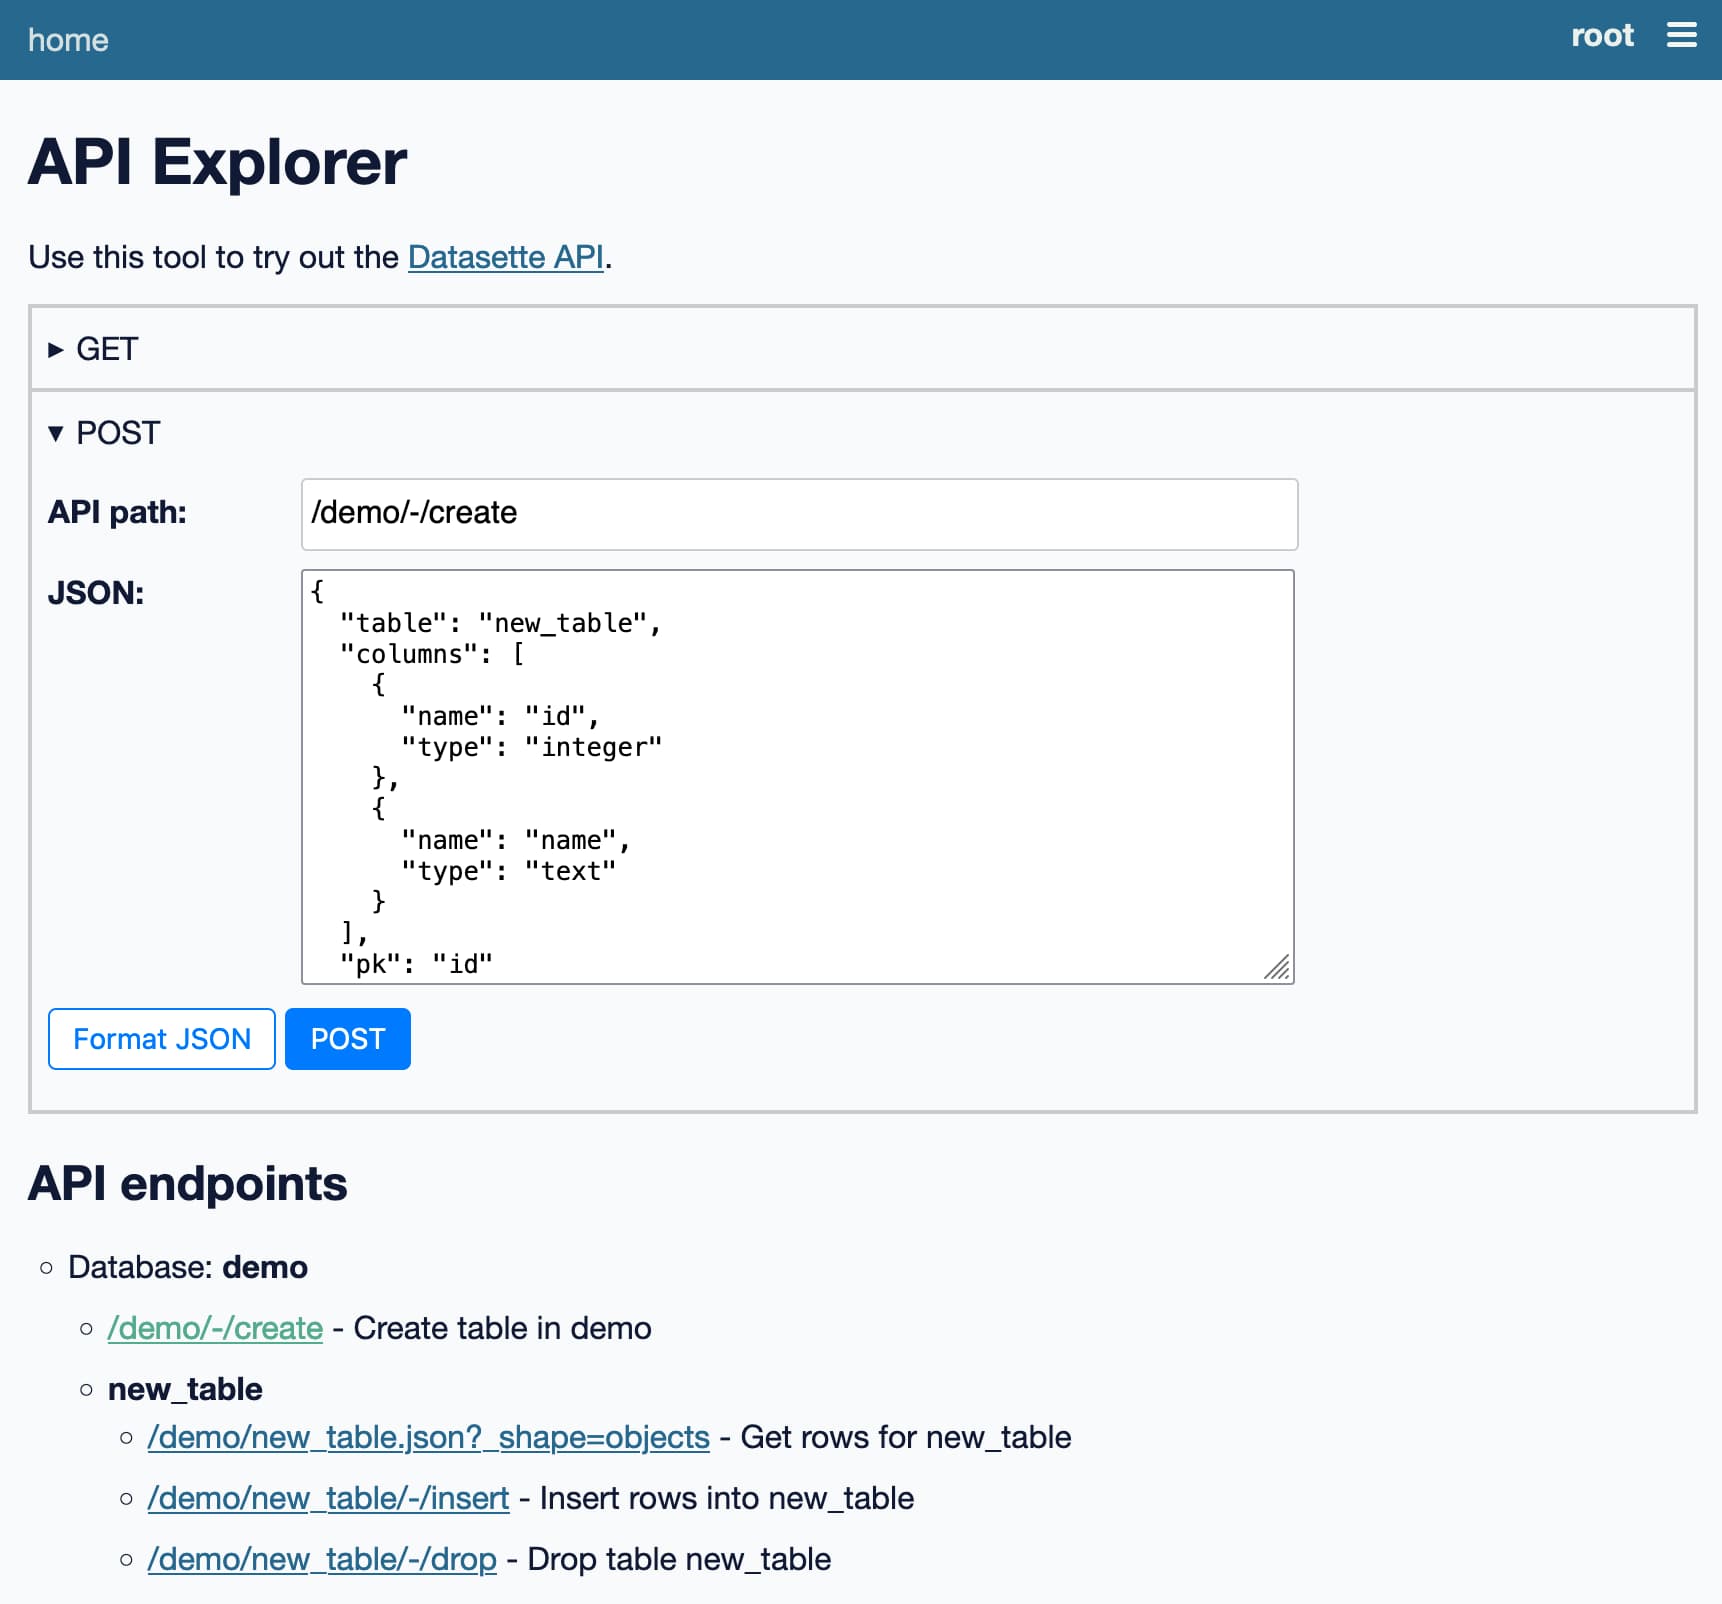 The API explorer interface has tools for sending GET and POST requests, plus a list of API endpoints